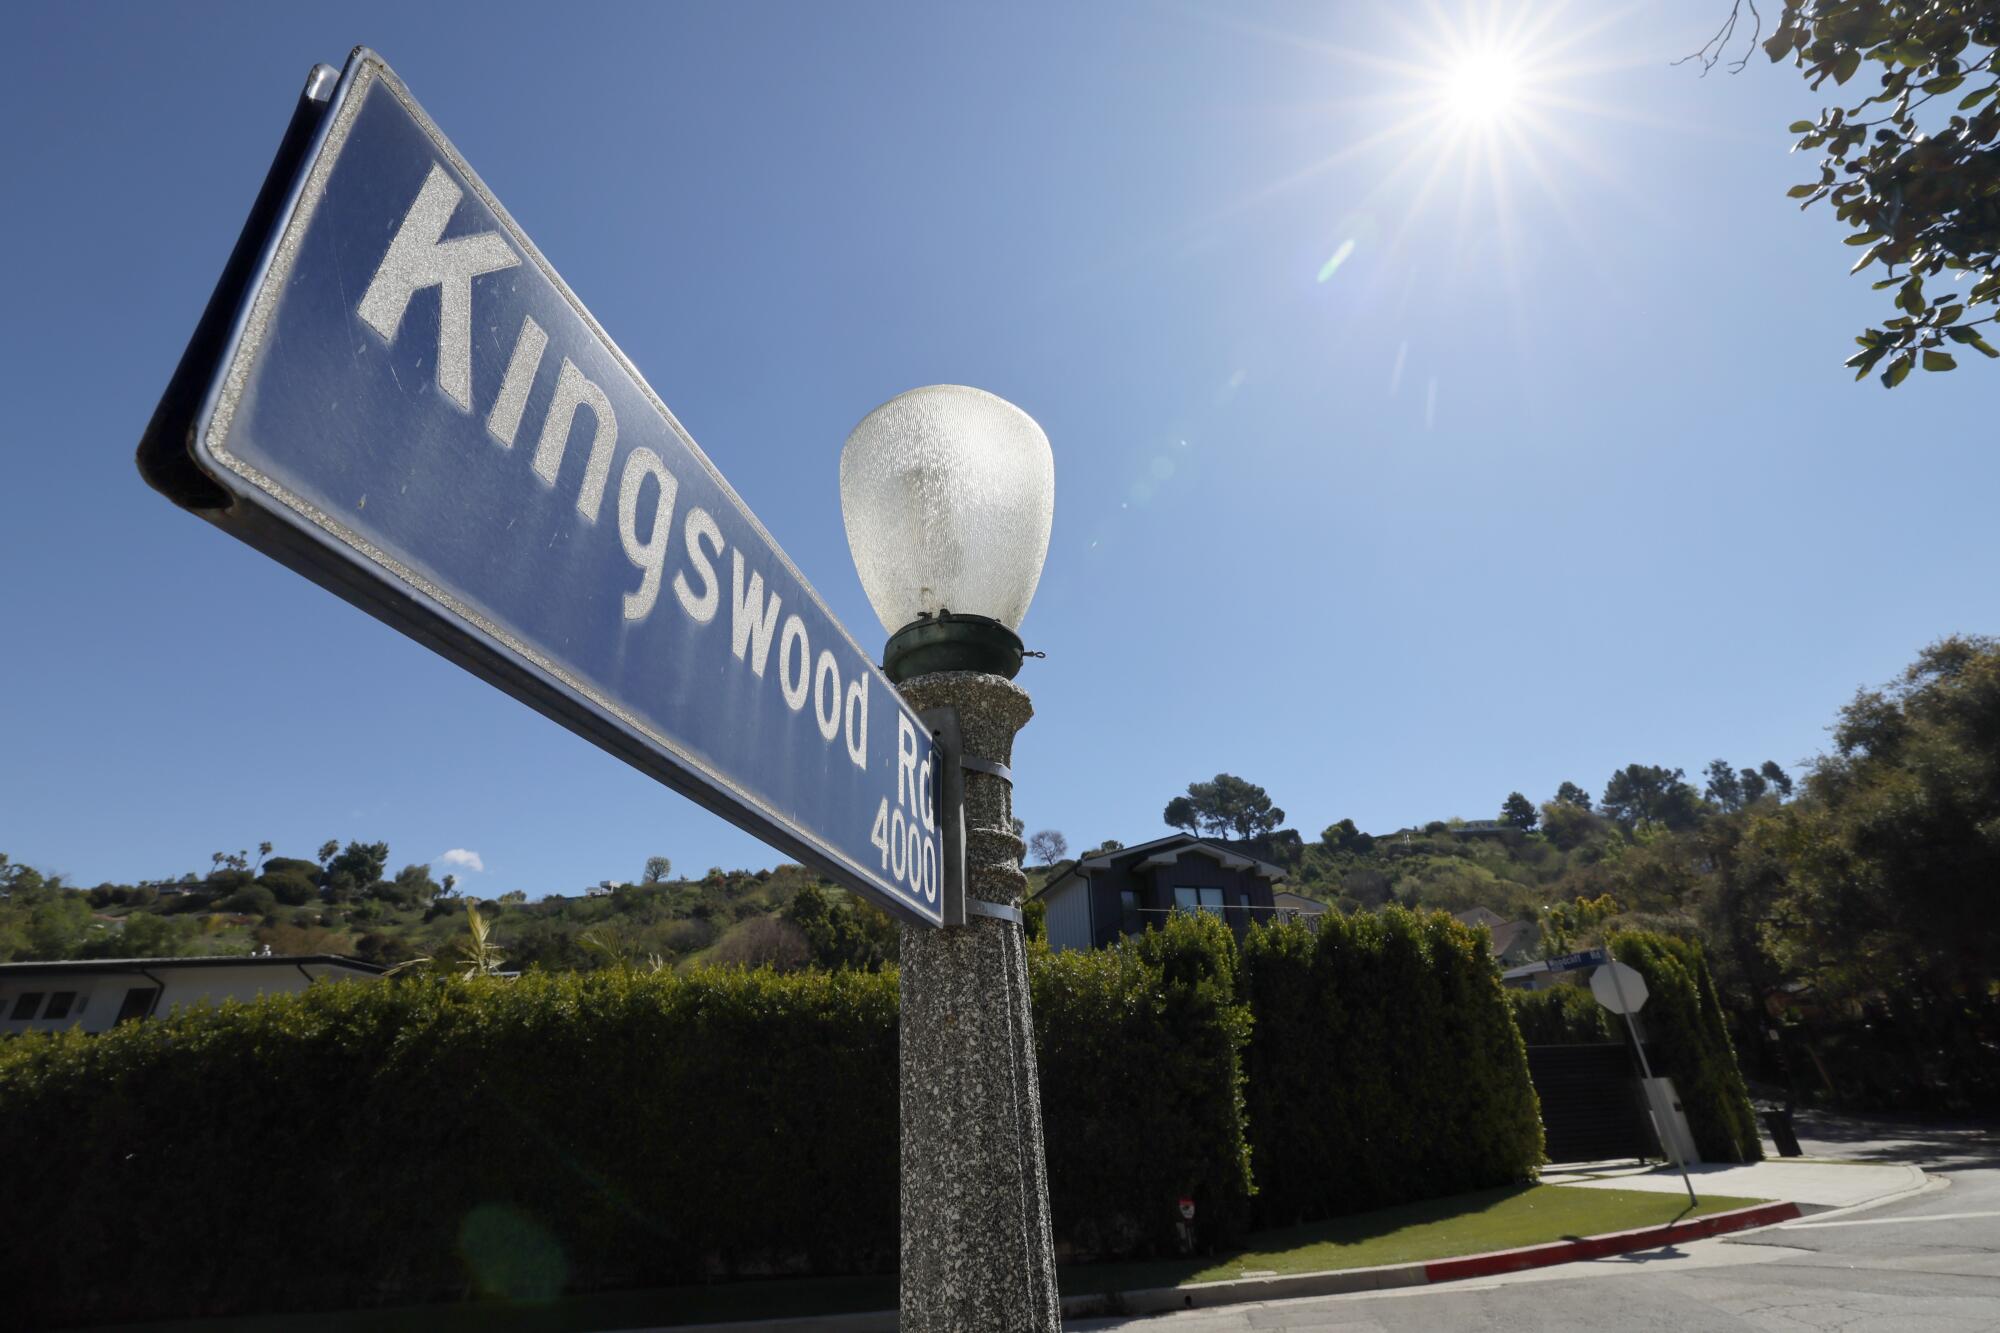 A Kingswood Road street sign.